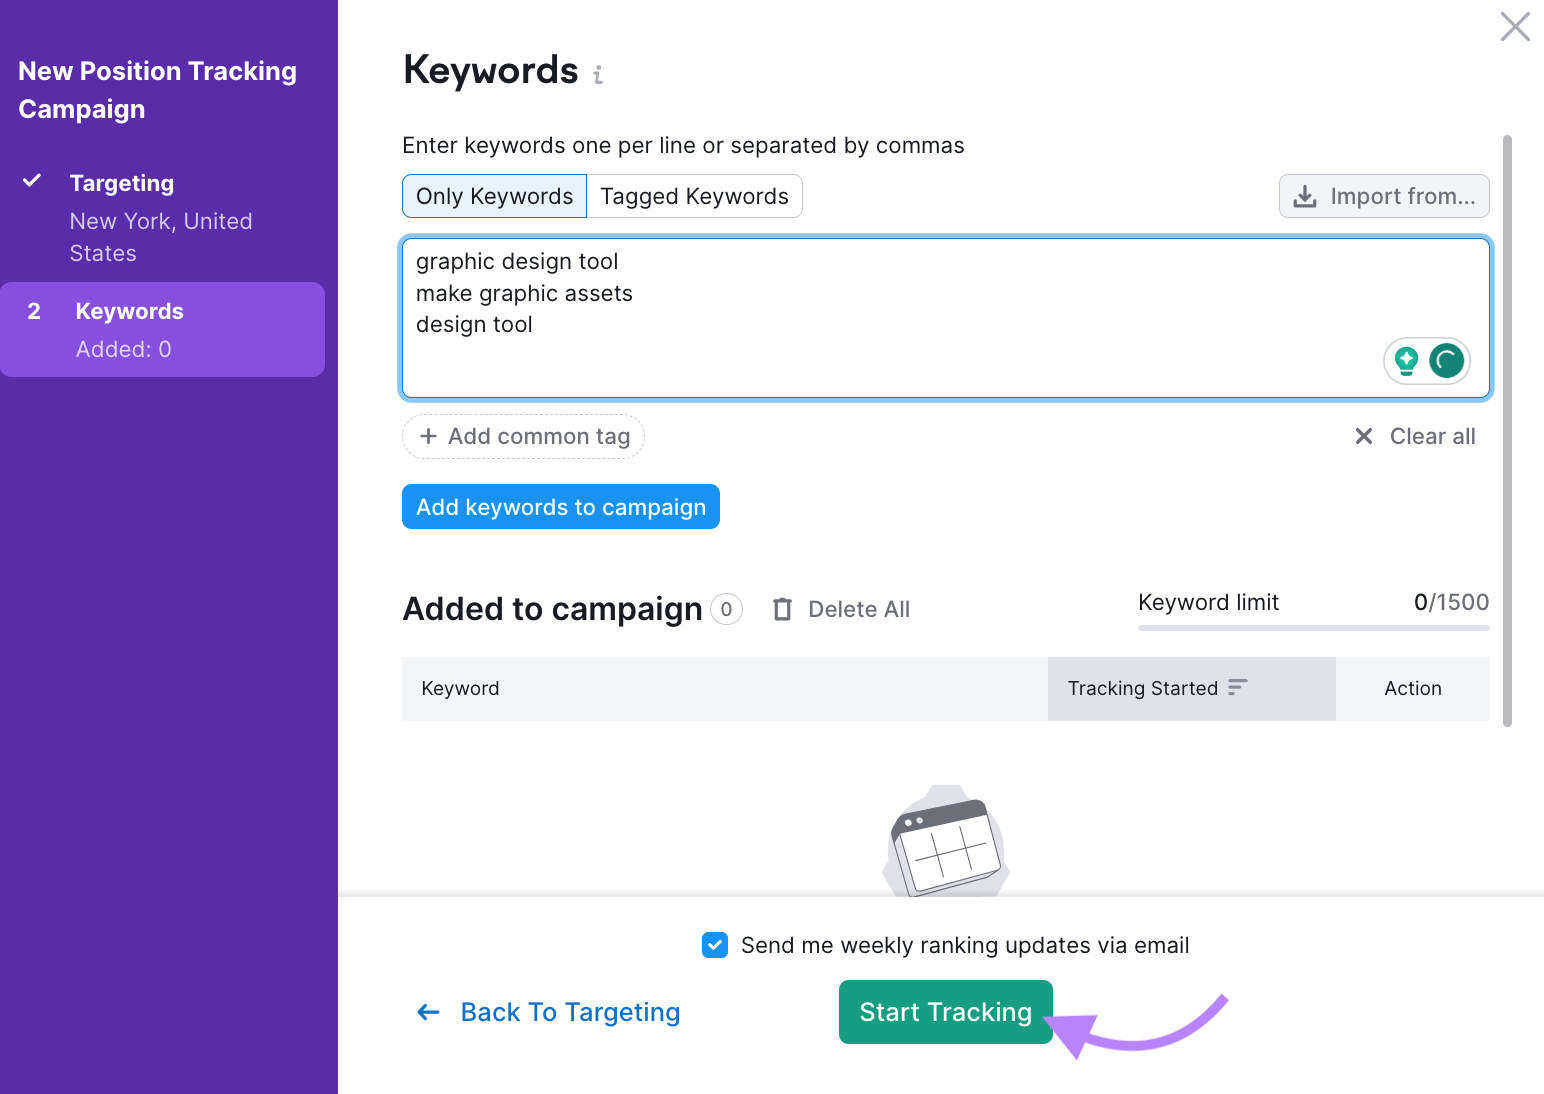 "Keywords" page in Position Tracking tool